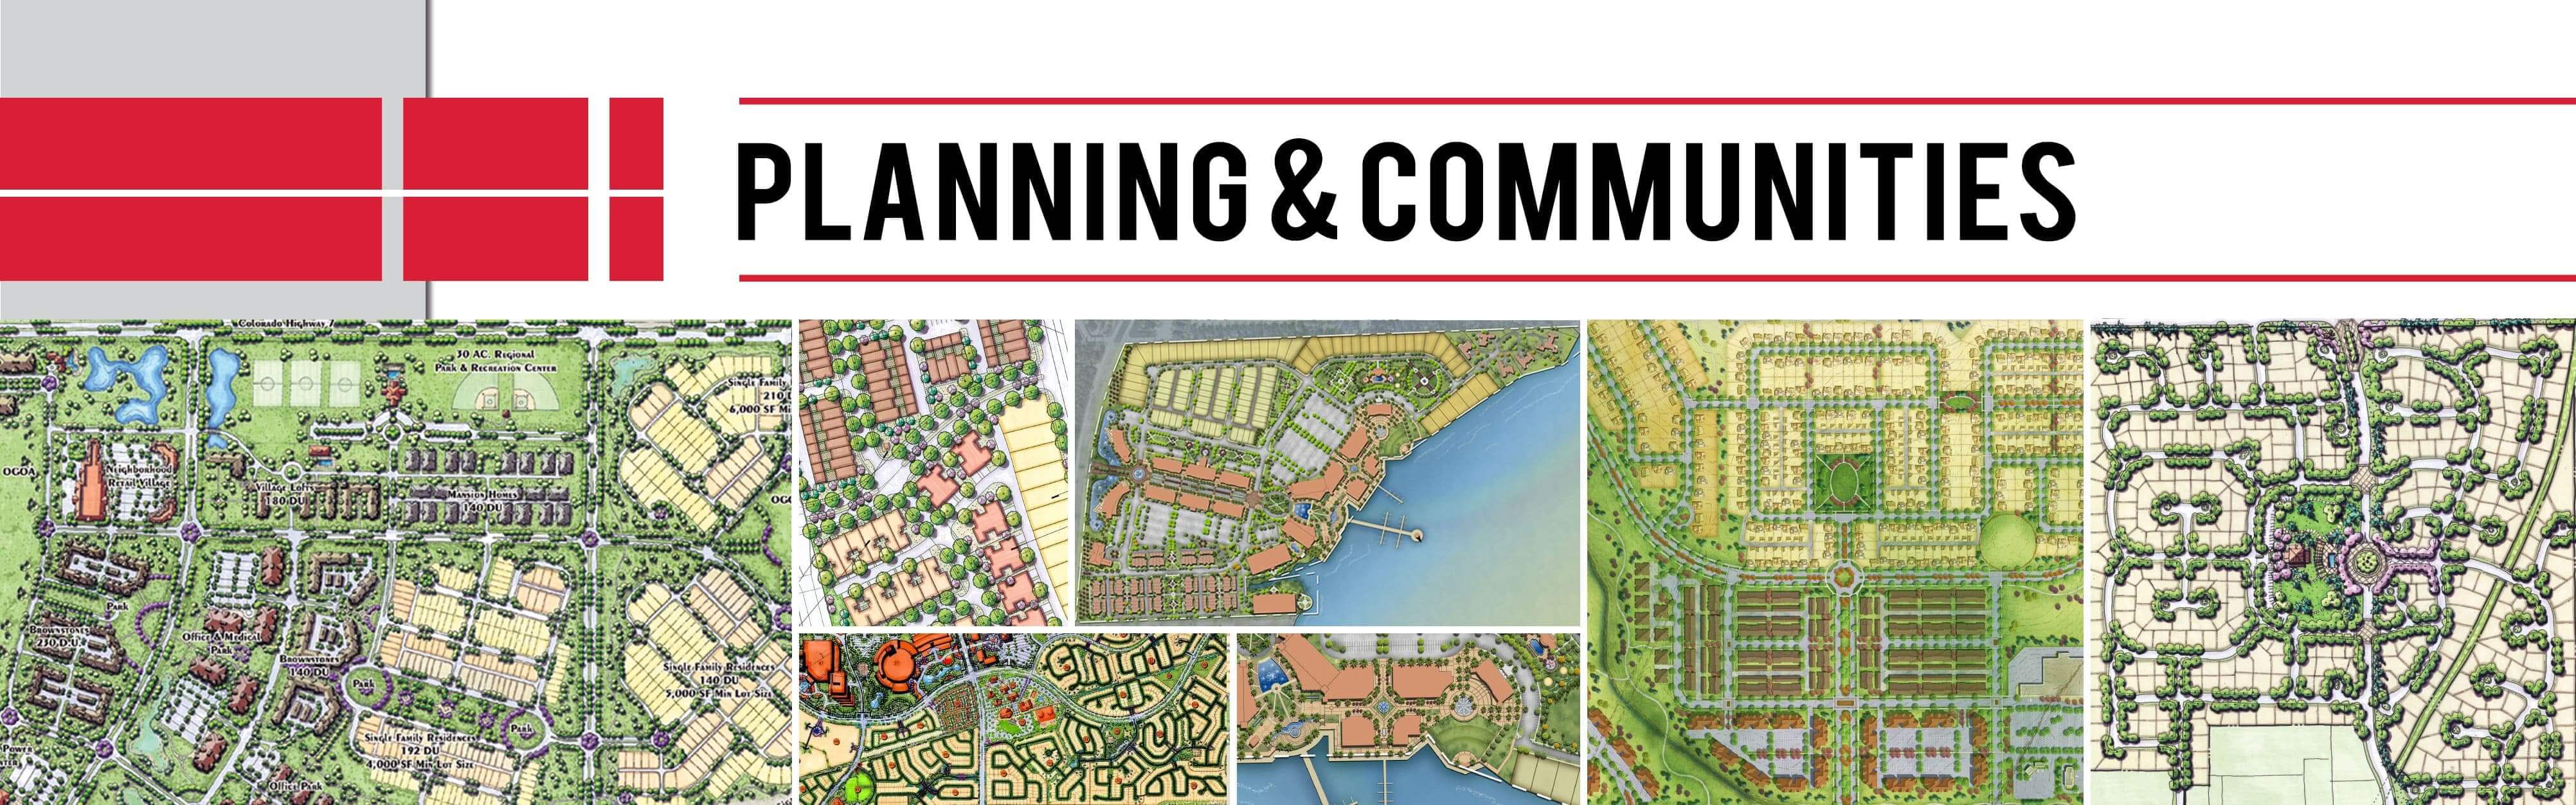 Architects that specialize in Planning and Communities